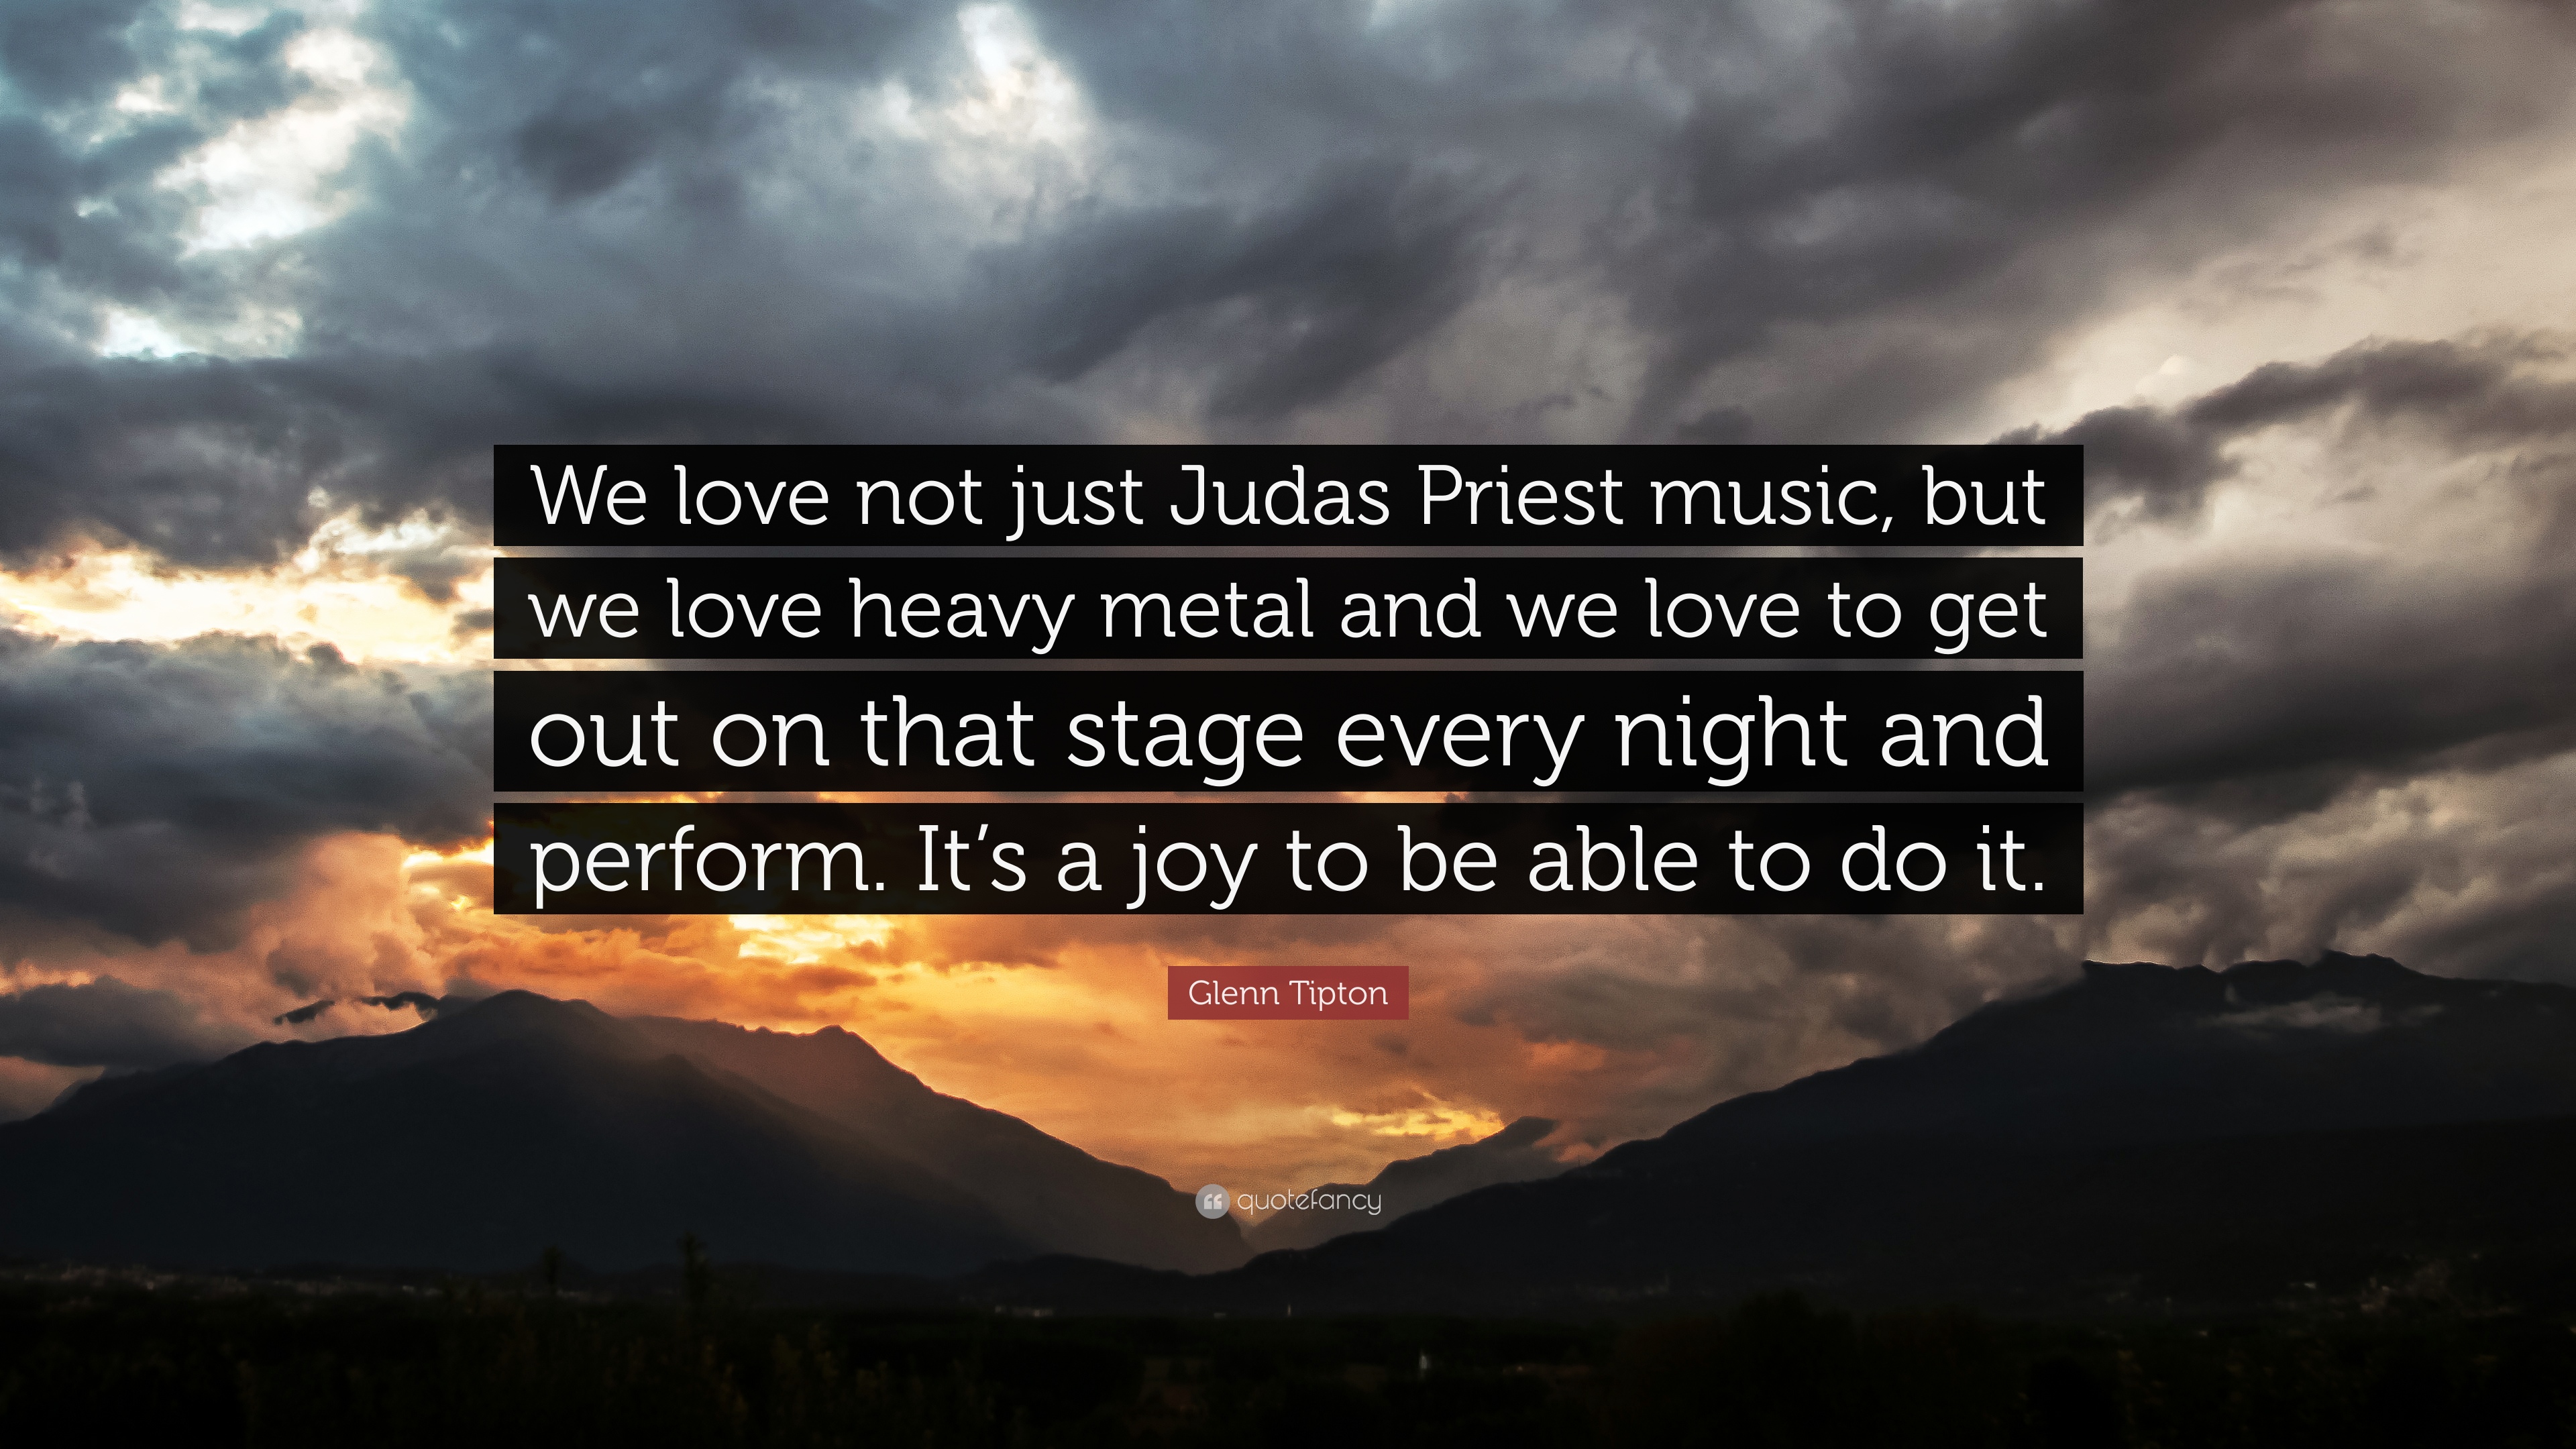 7 Judas Priest Quotes About Love